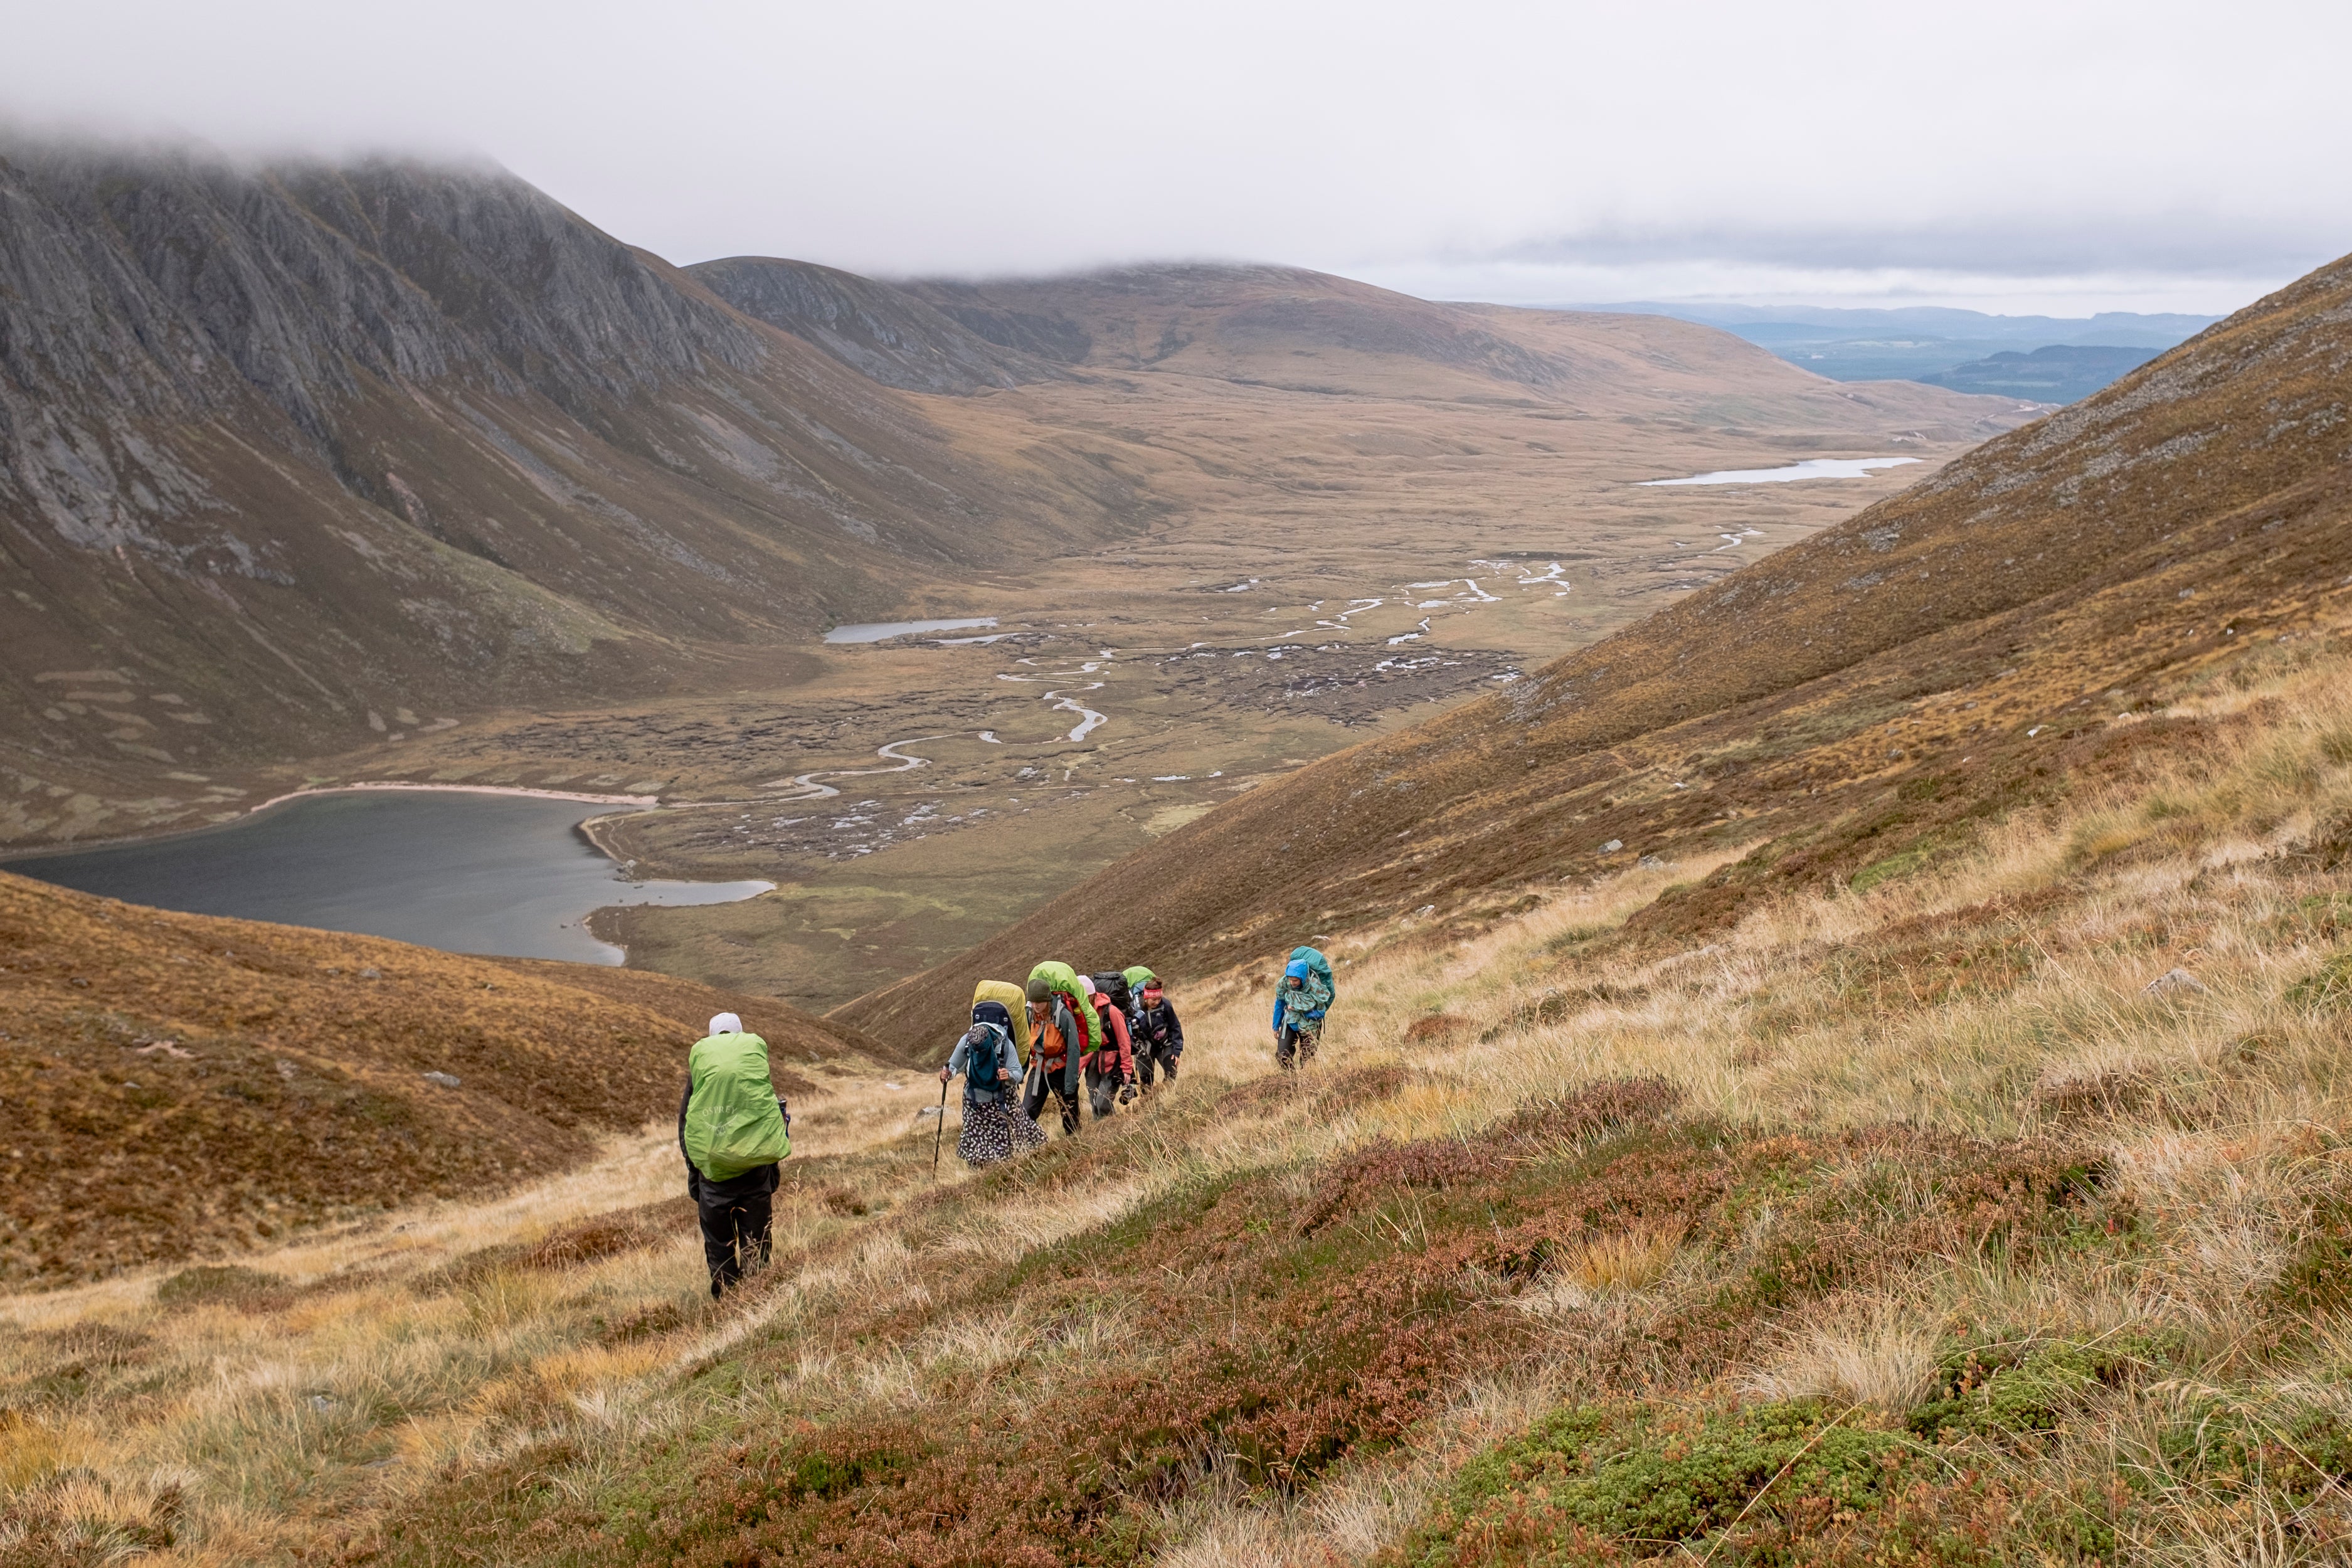 Group of women hiking in Scotland’s Cairngorm mountains